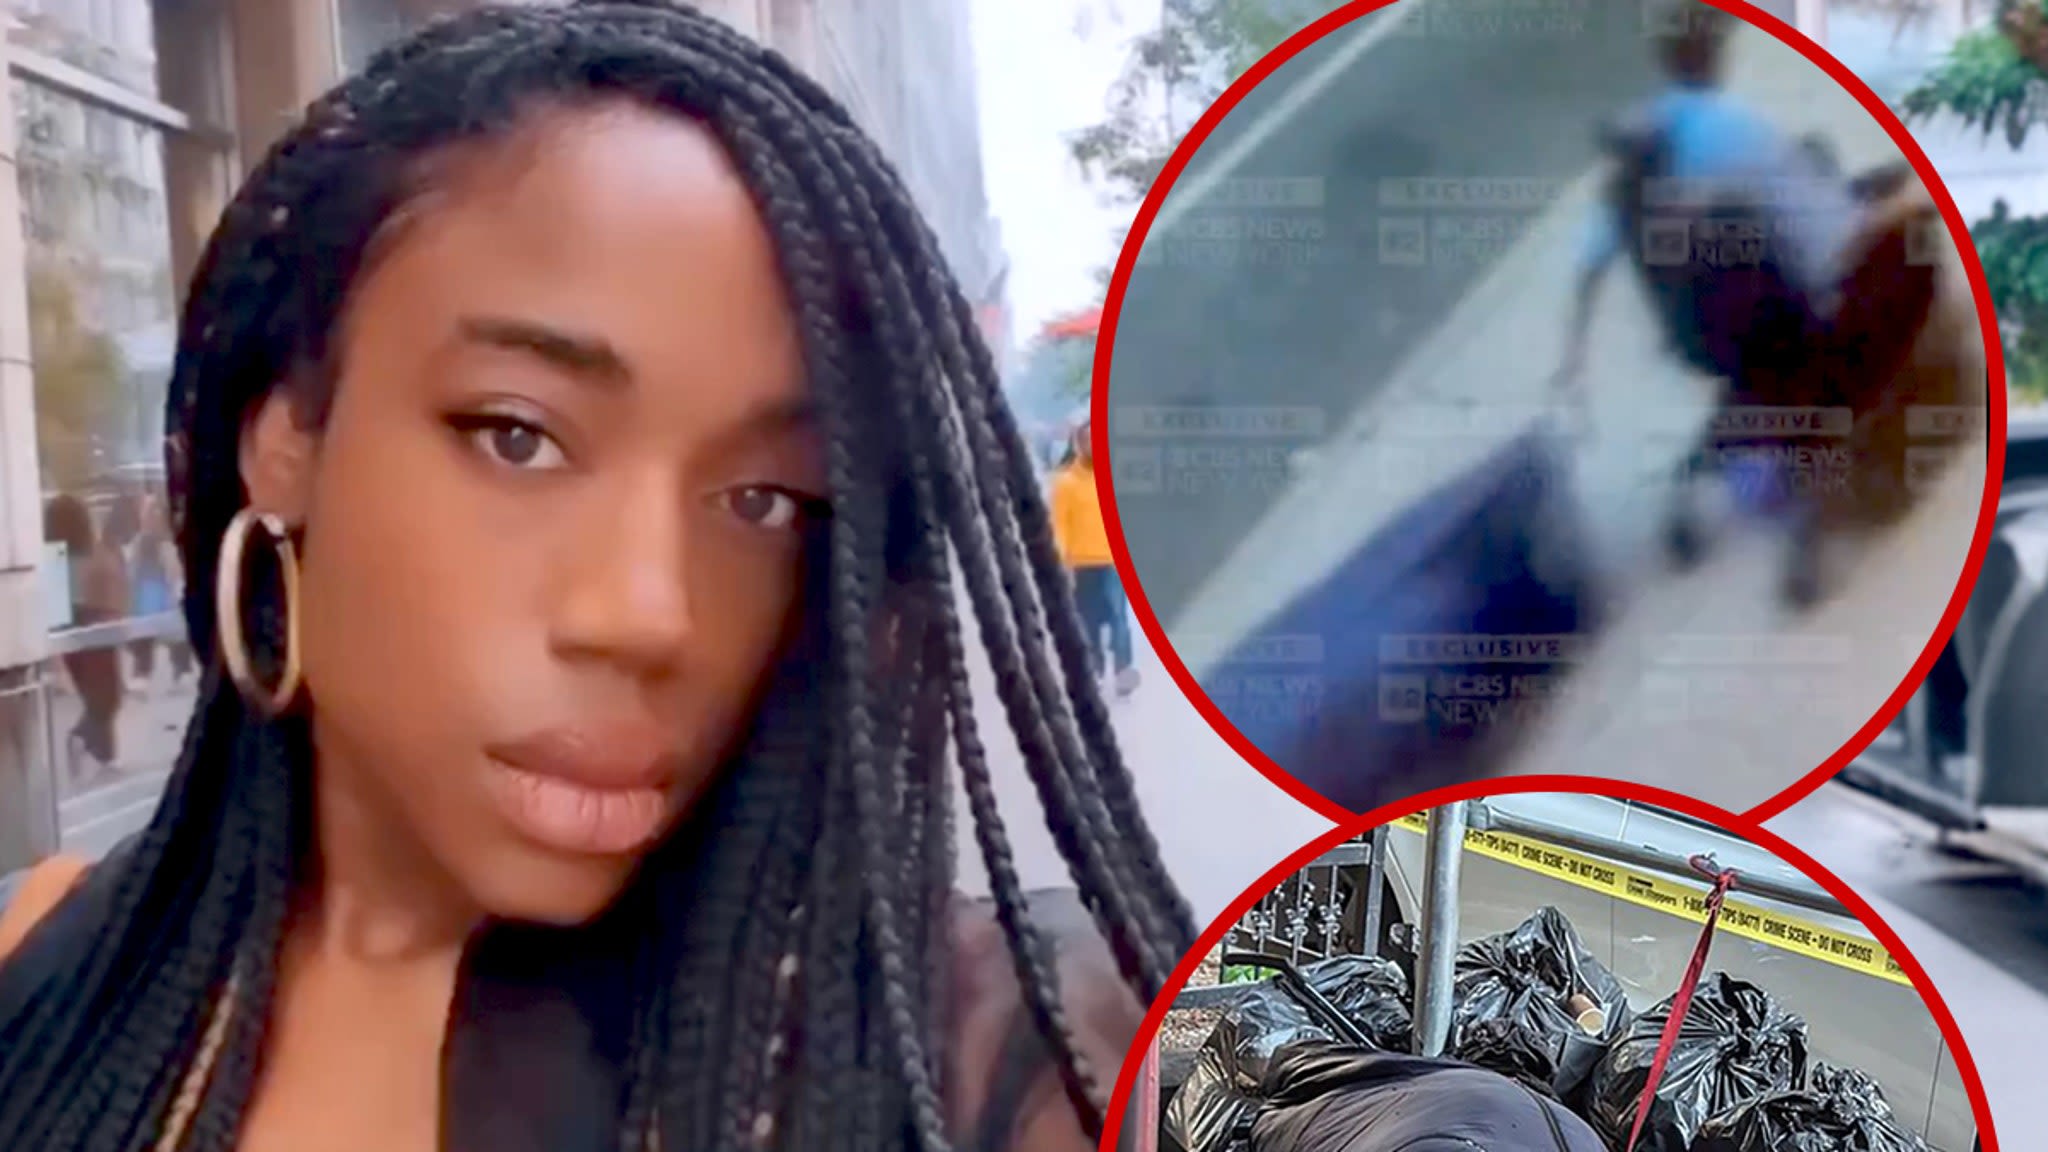 Horrifying Video Appears to Show Yazmeen Williams' Body Dragged in Sleeping Bag